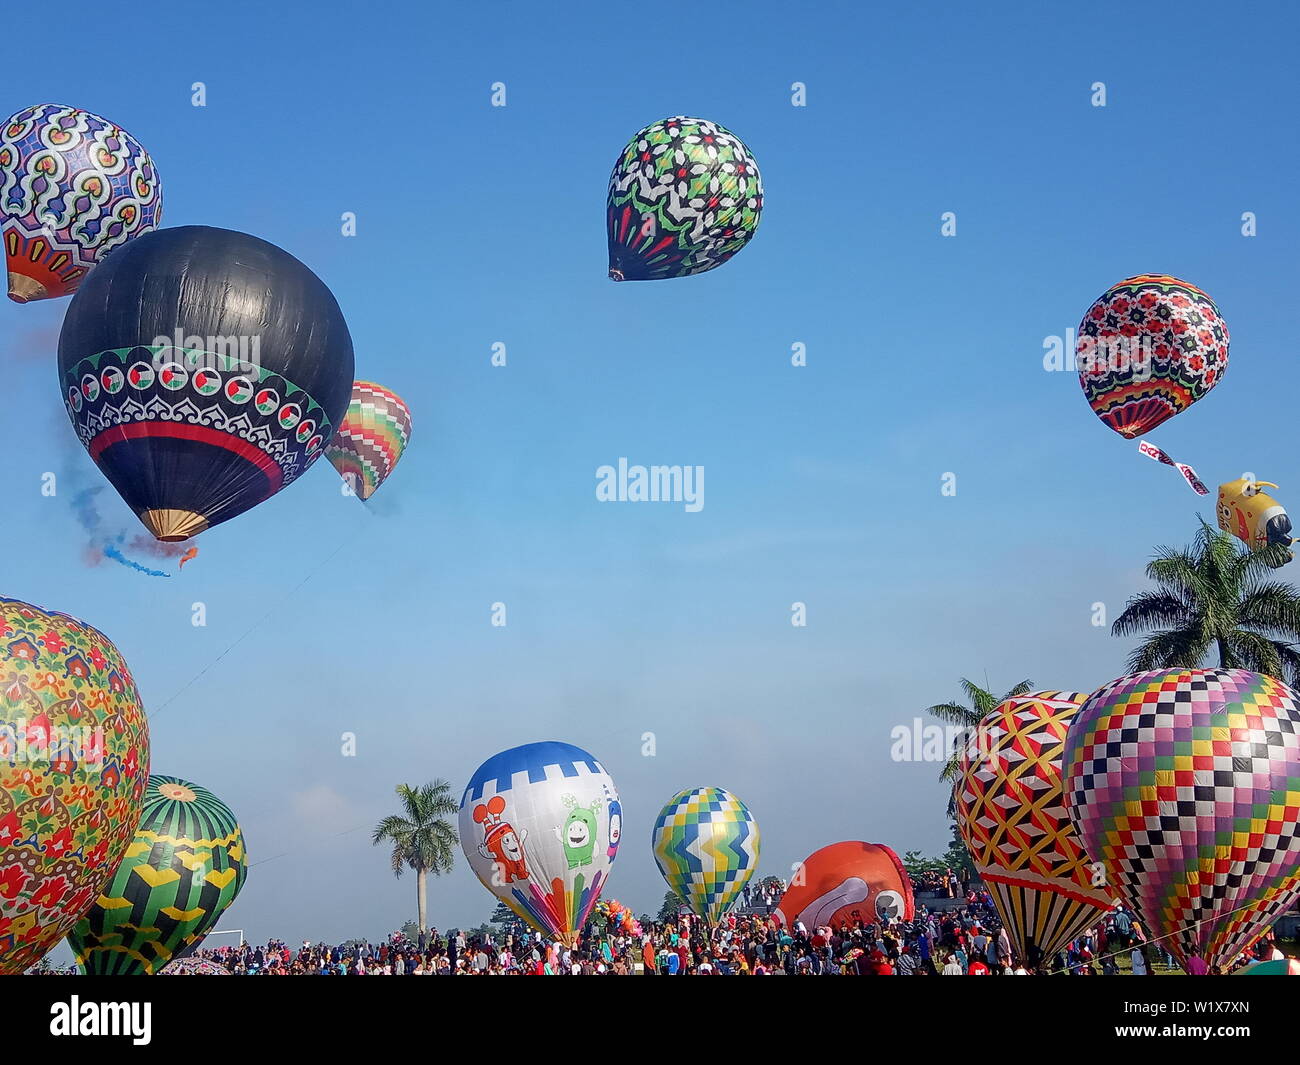 the excitement of traditional big balloon flights, every year on the day of Eid al-Fitr, after the fasting month by the people of Wonosobo, Indonesia Stock Photo